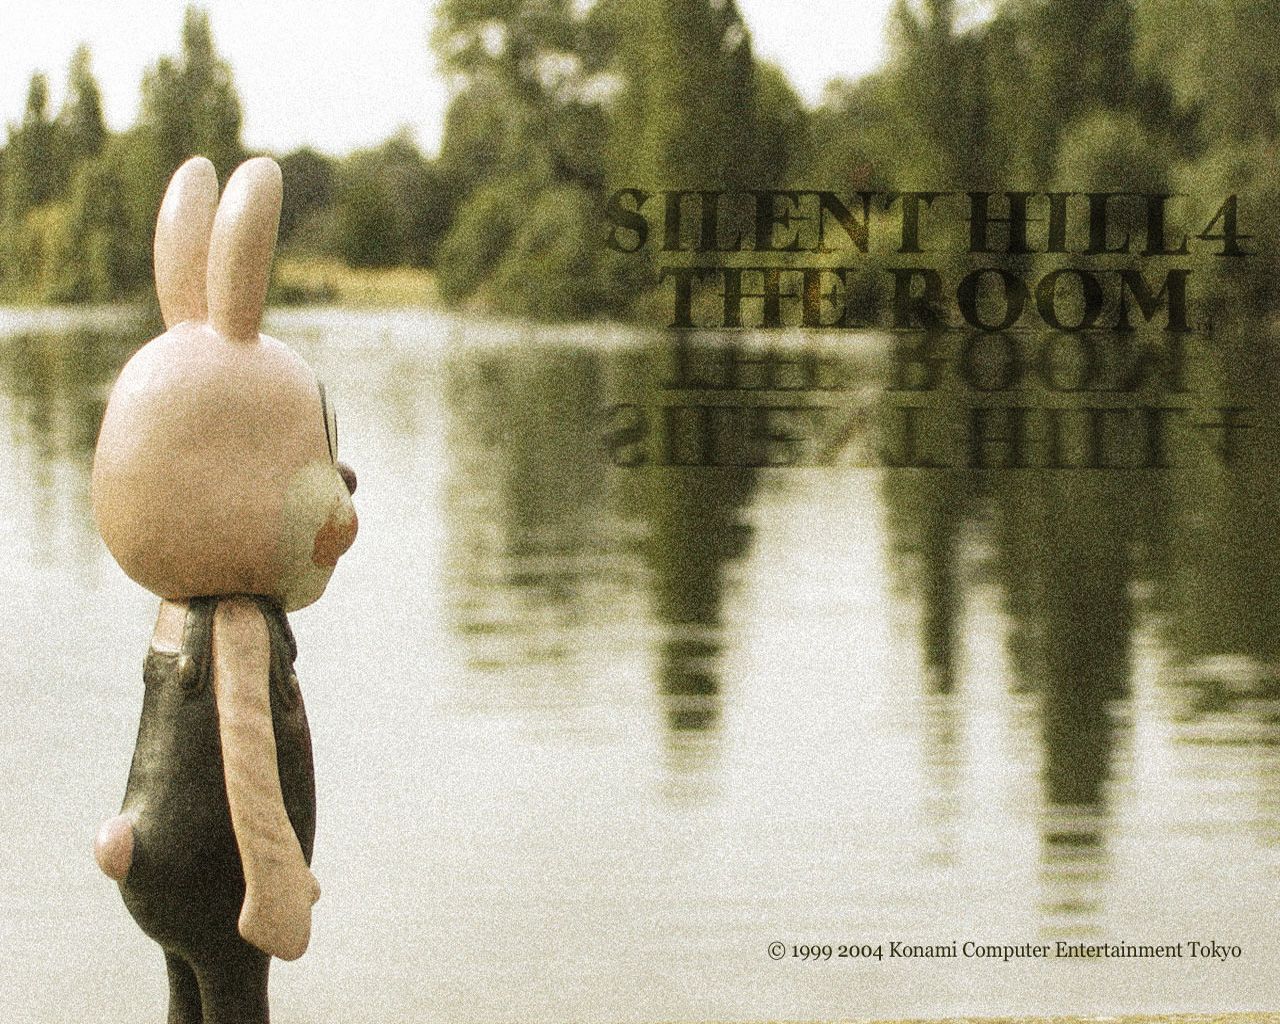 Silent Hill 4: The Room (2004) promotional art